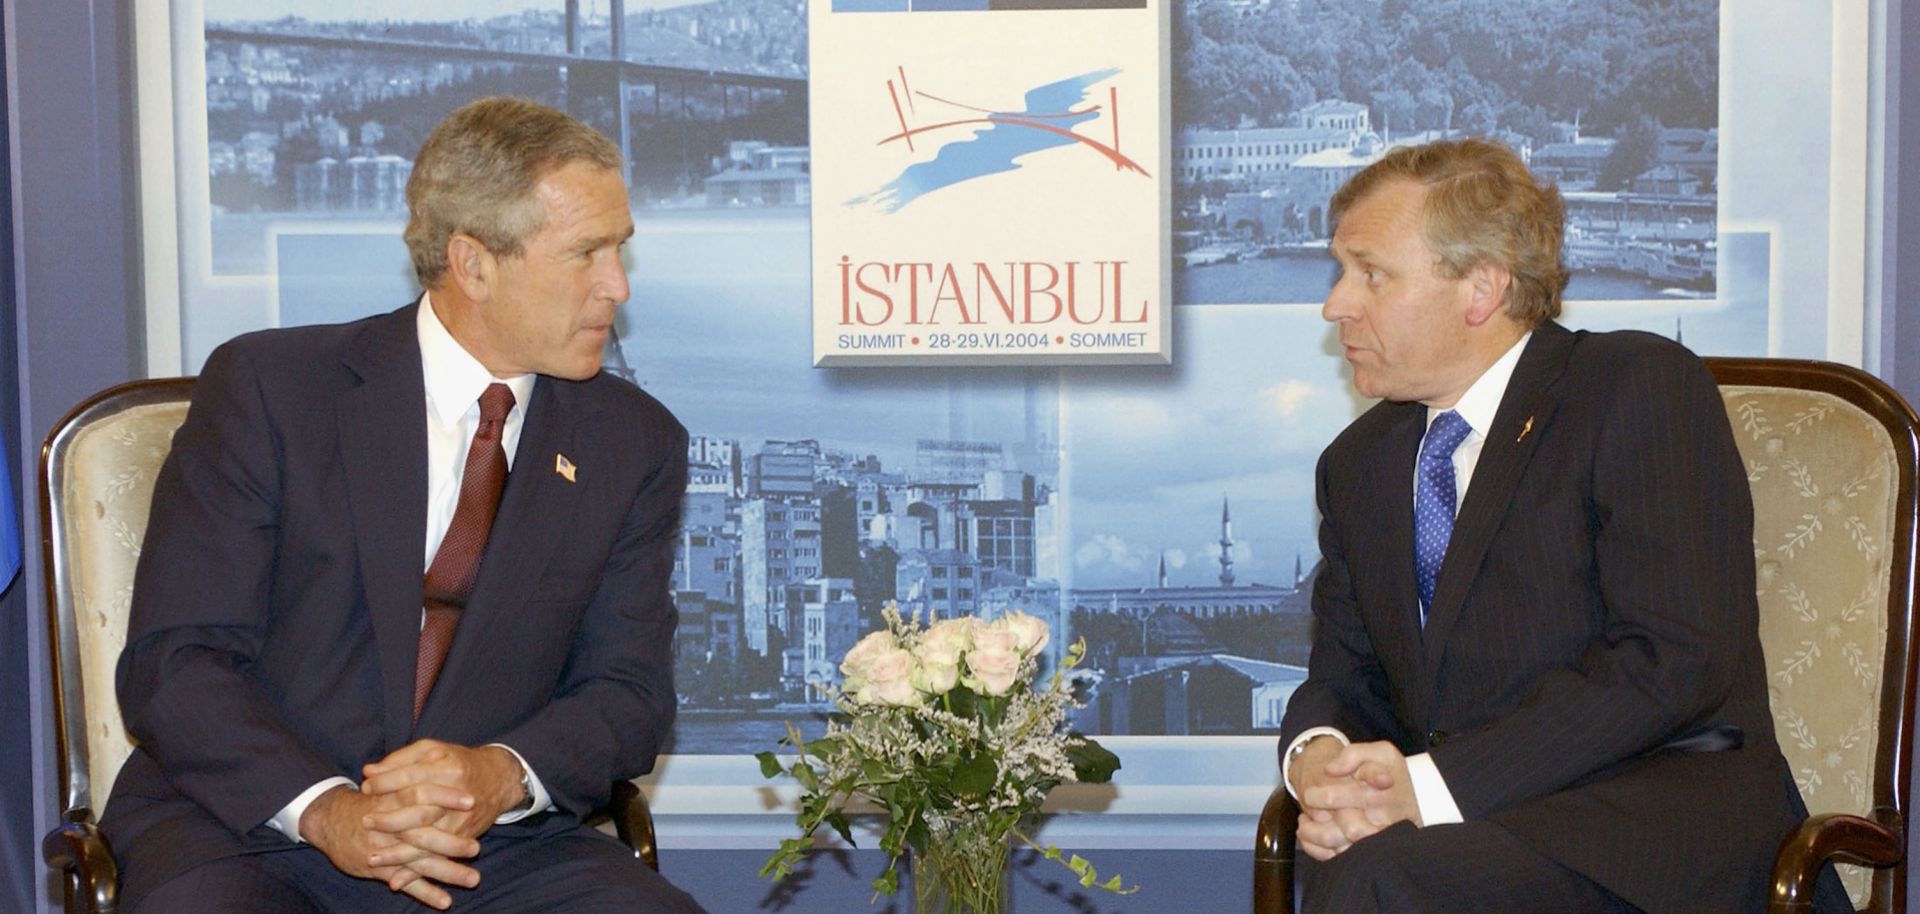 In this handout photo provided by NATO, U.S. President George W. Bush (L) and NATO Secretary-General Jaap de Hoop Scheffer discuss matters during the annual NATO summit on June 27, 2004, in Istanbul. 